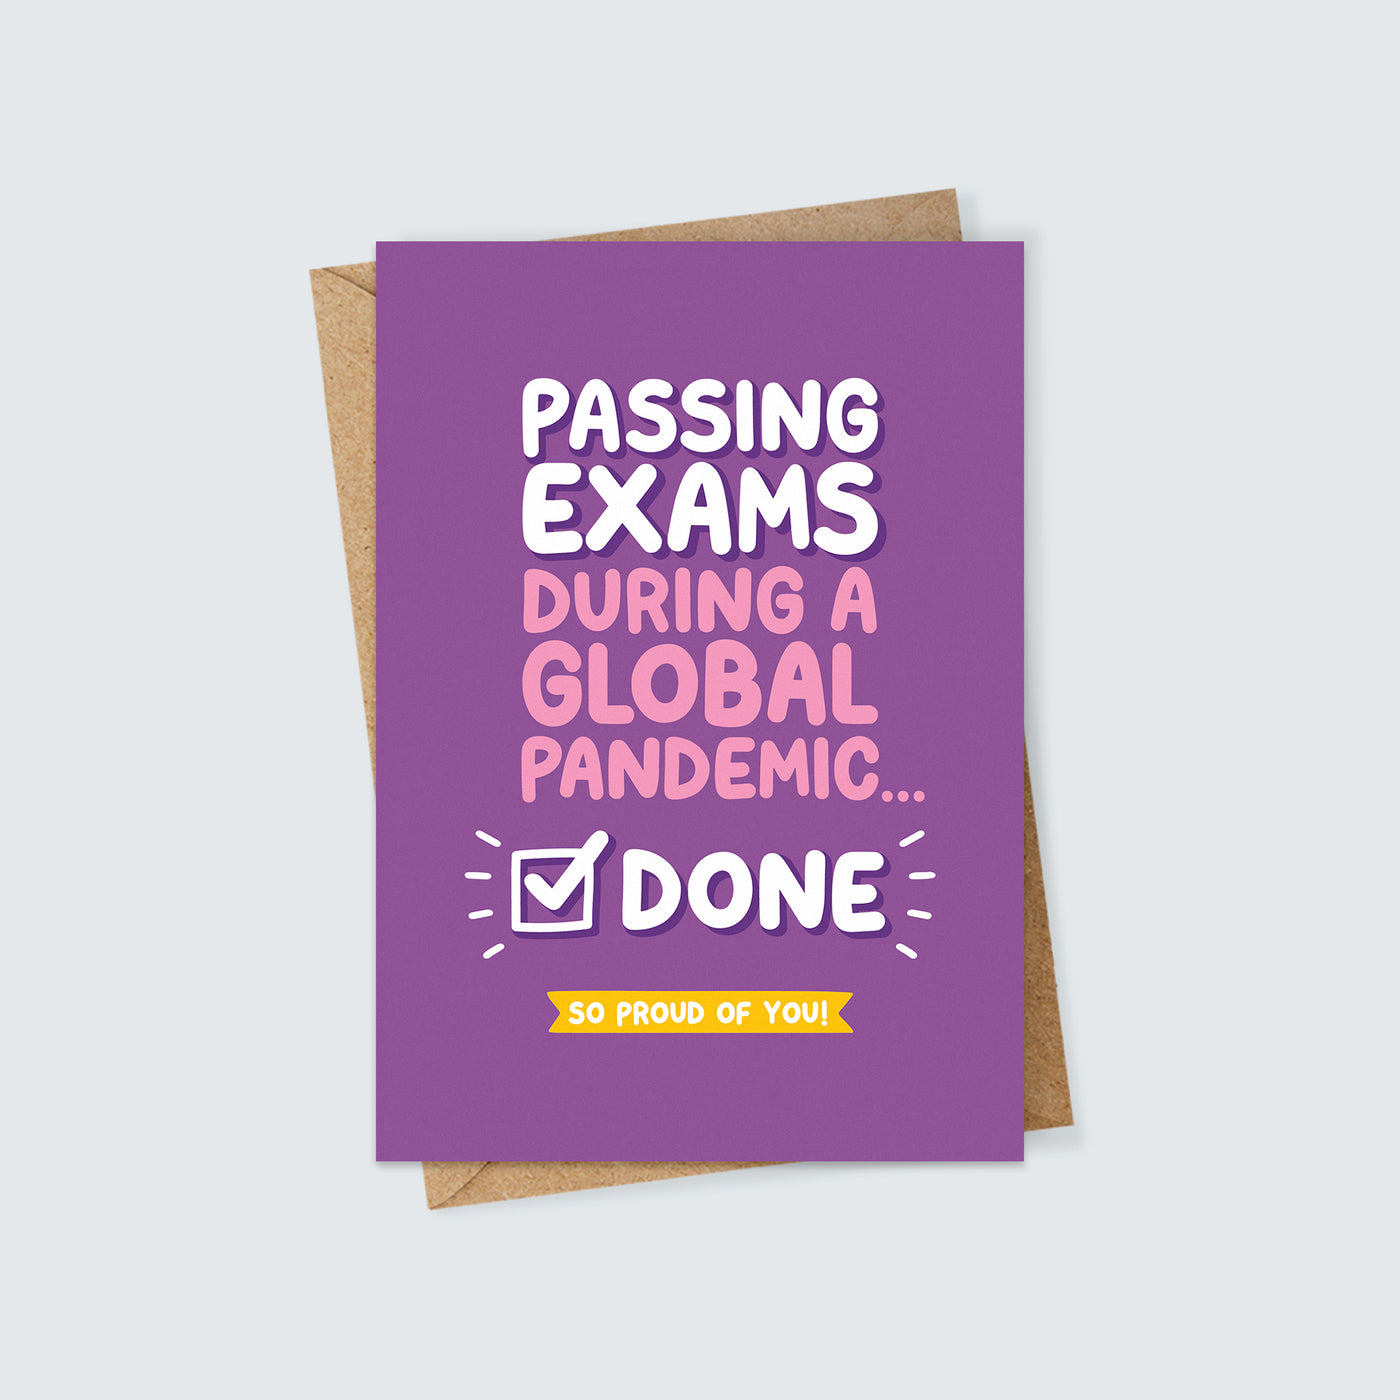 Global Pandemic Exam Results Card